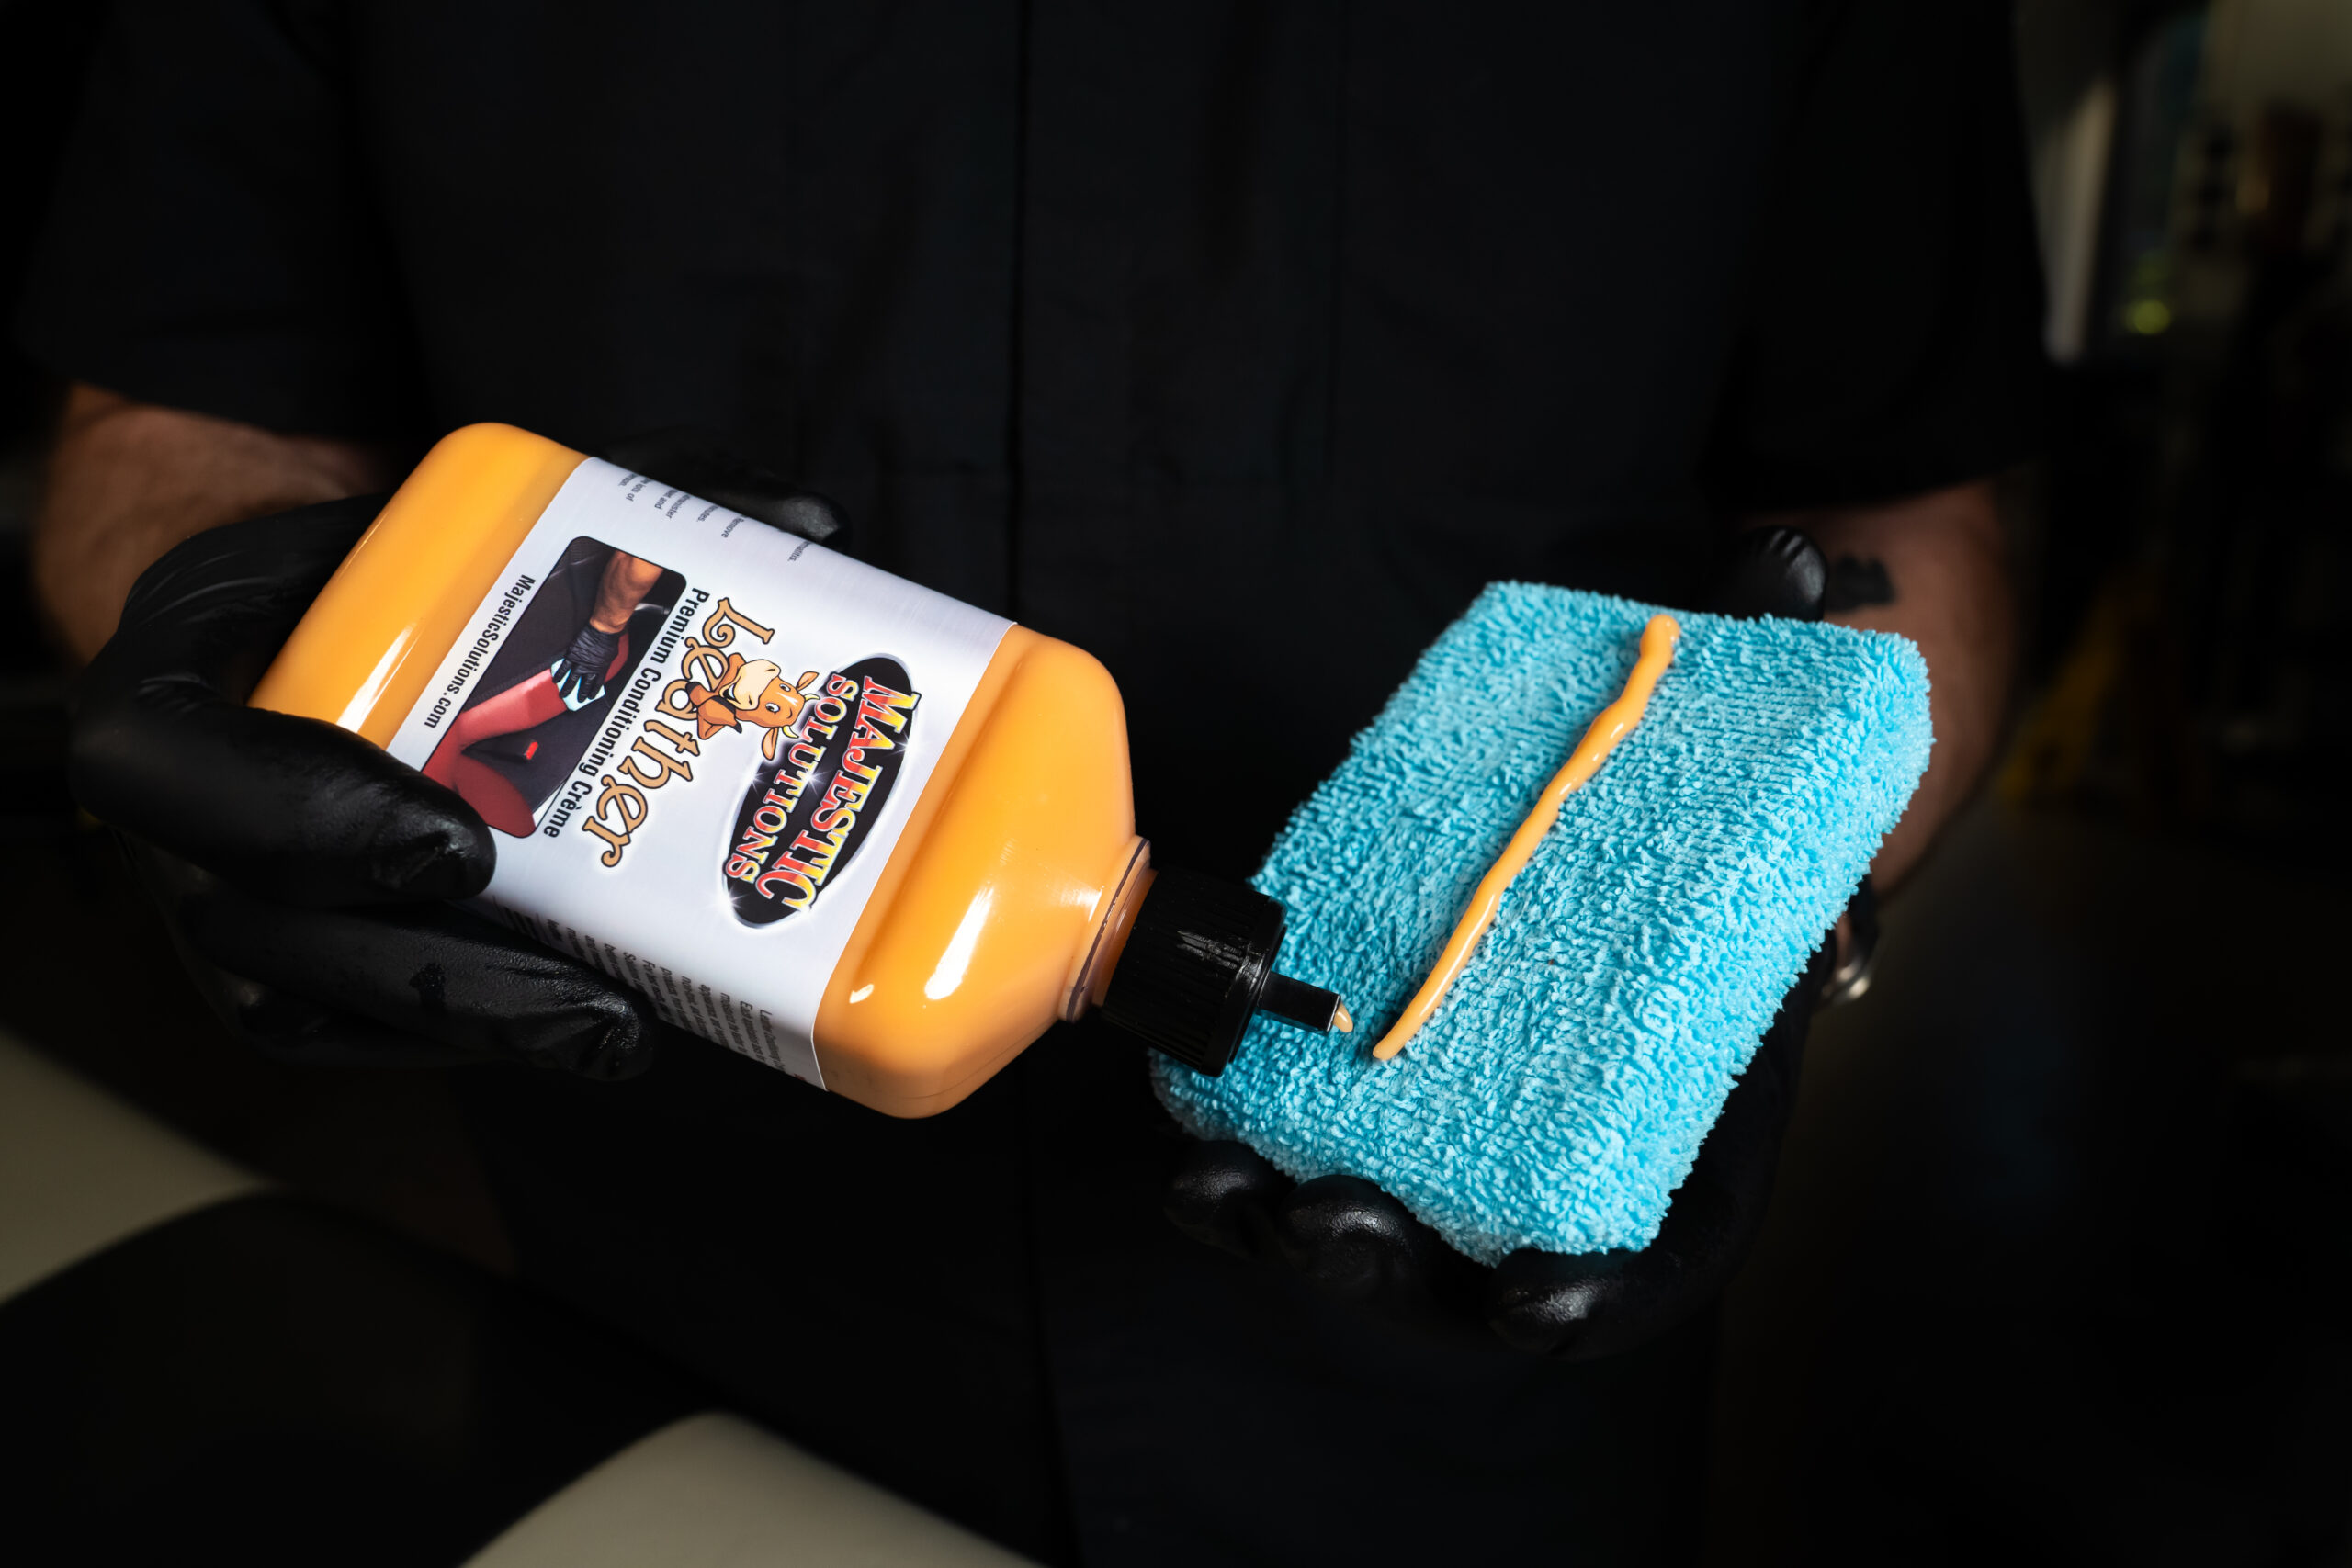 LEATHER CONDITIONER - Majestic Solutions Auto Detail Products